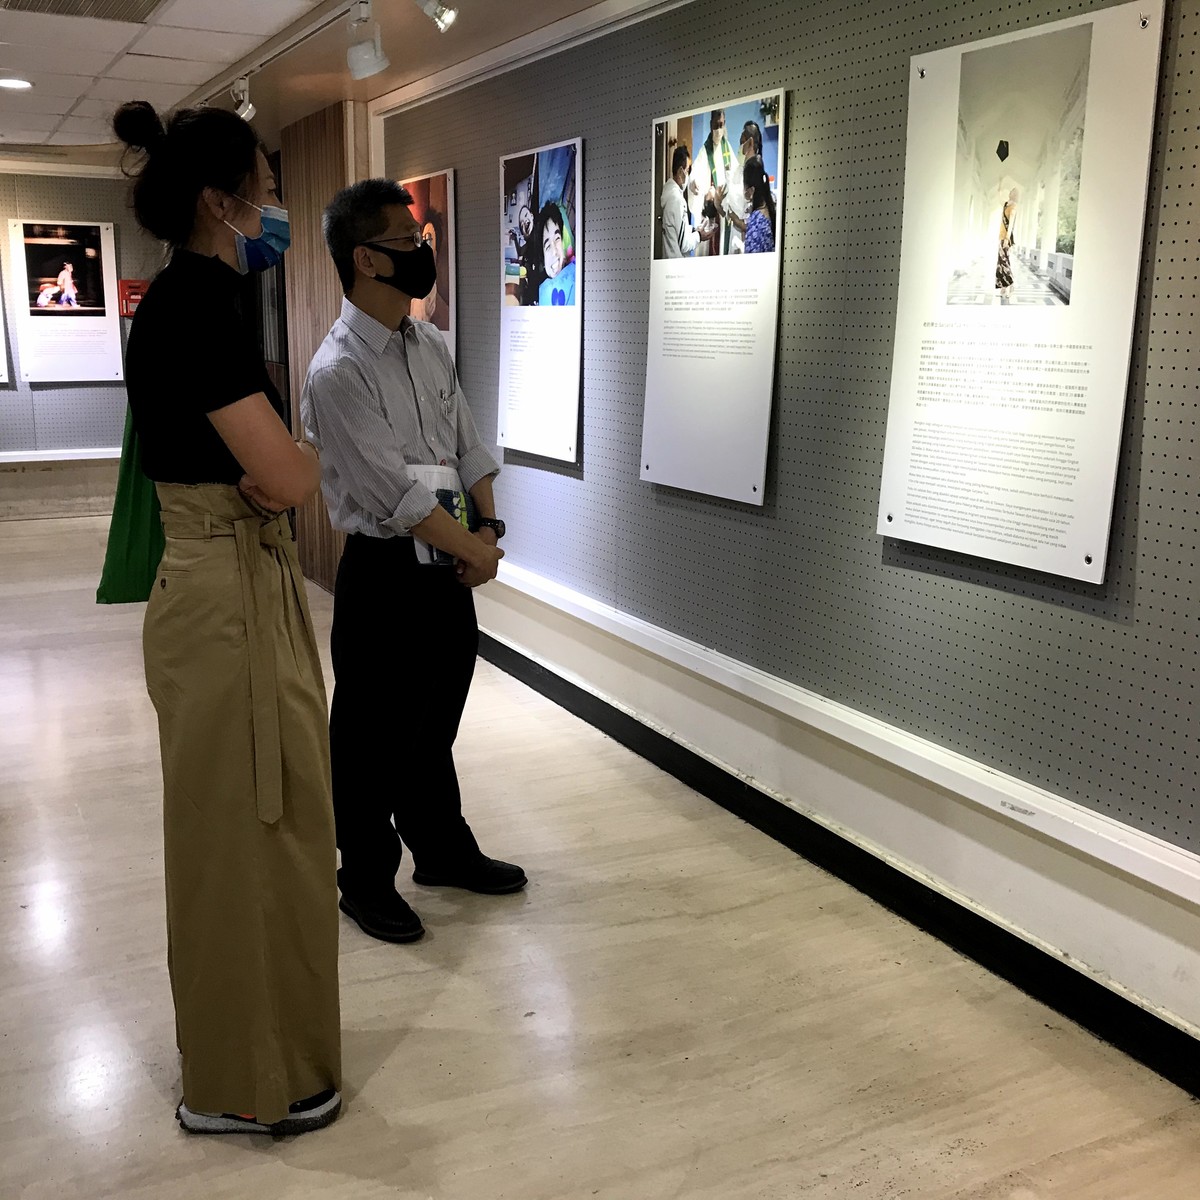 NSYSU hosts exhibition on migrant workers’ life stories